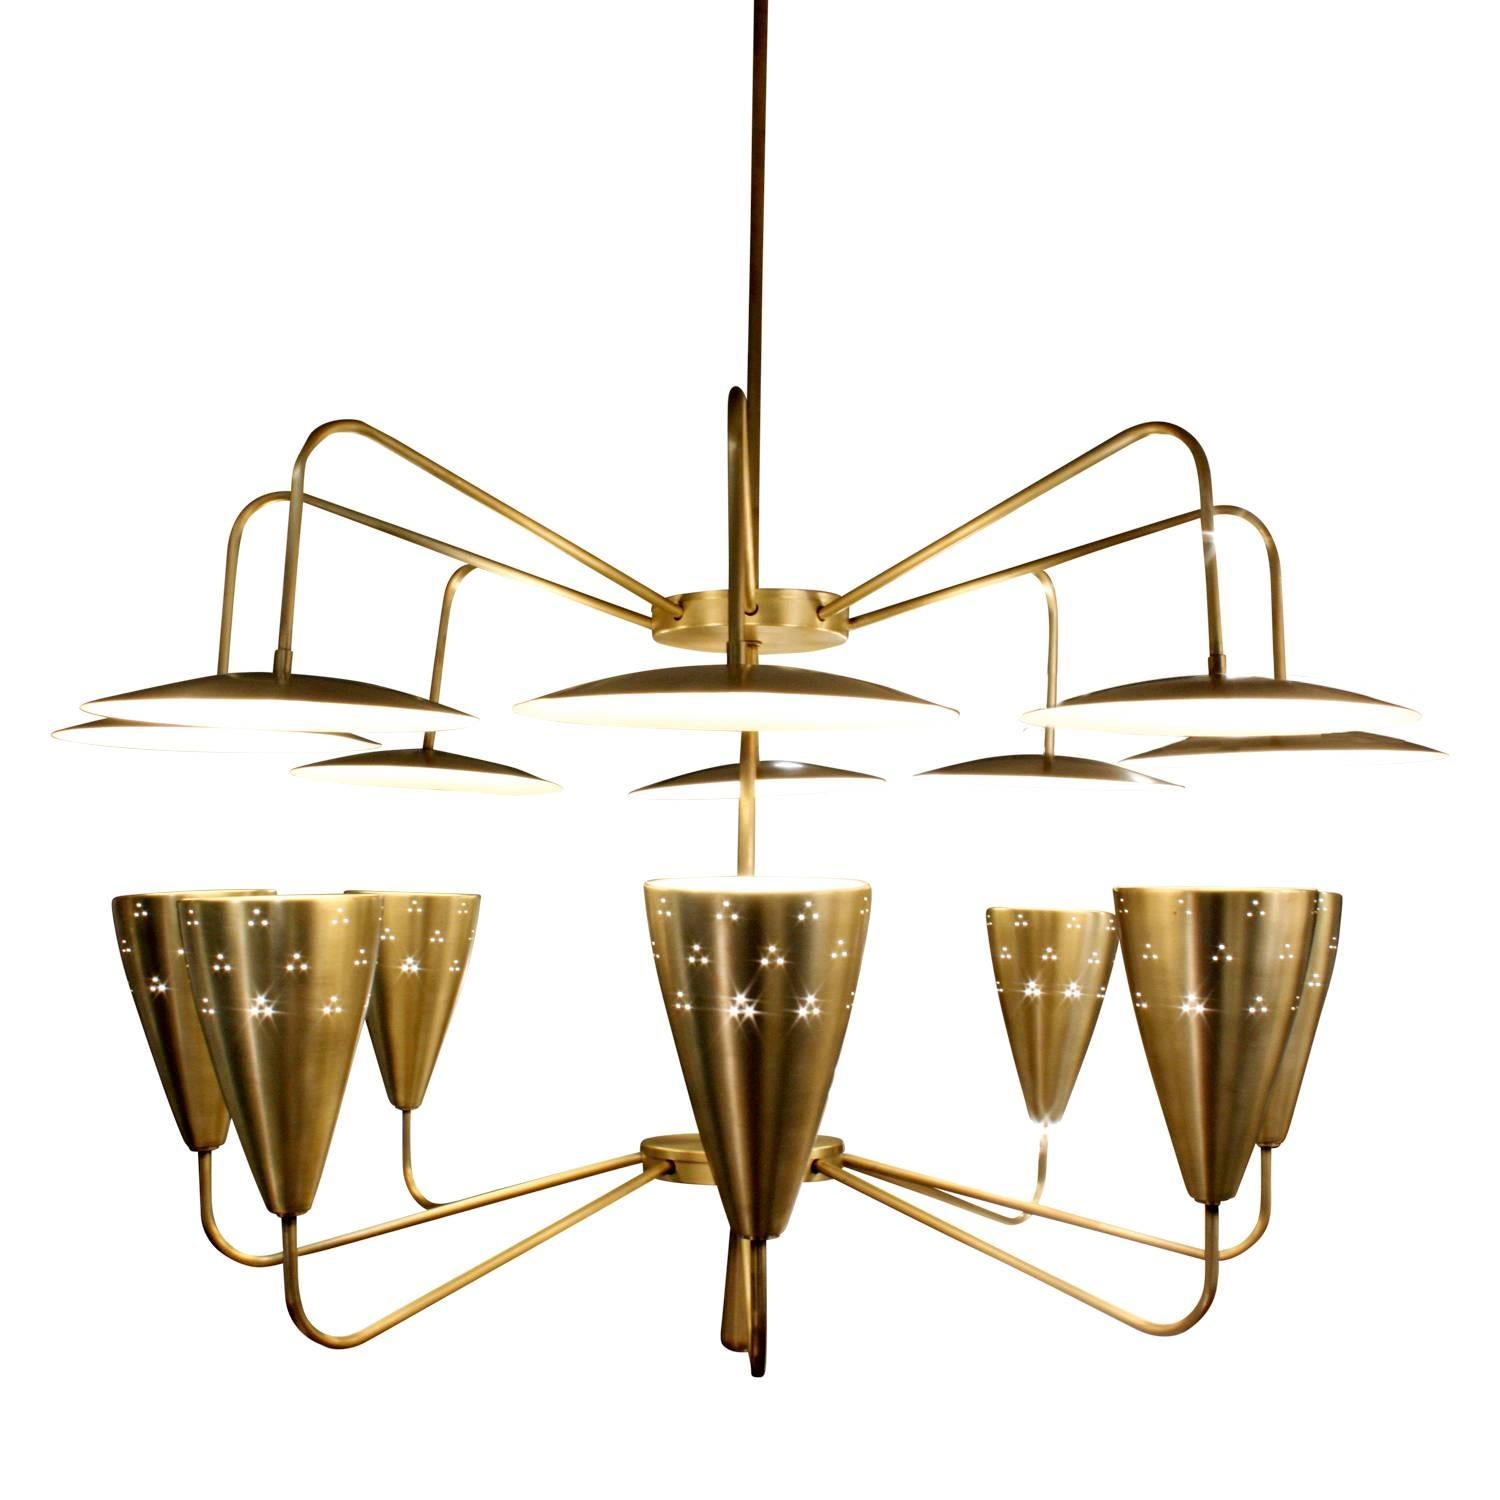 Large sculptural chandelier in satin brass with eight perforated shades facing lacquered reflectors by Northgate Lighting, American 1950s. This chandelier gives off a beautiful light.